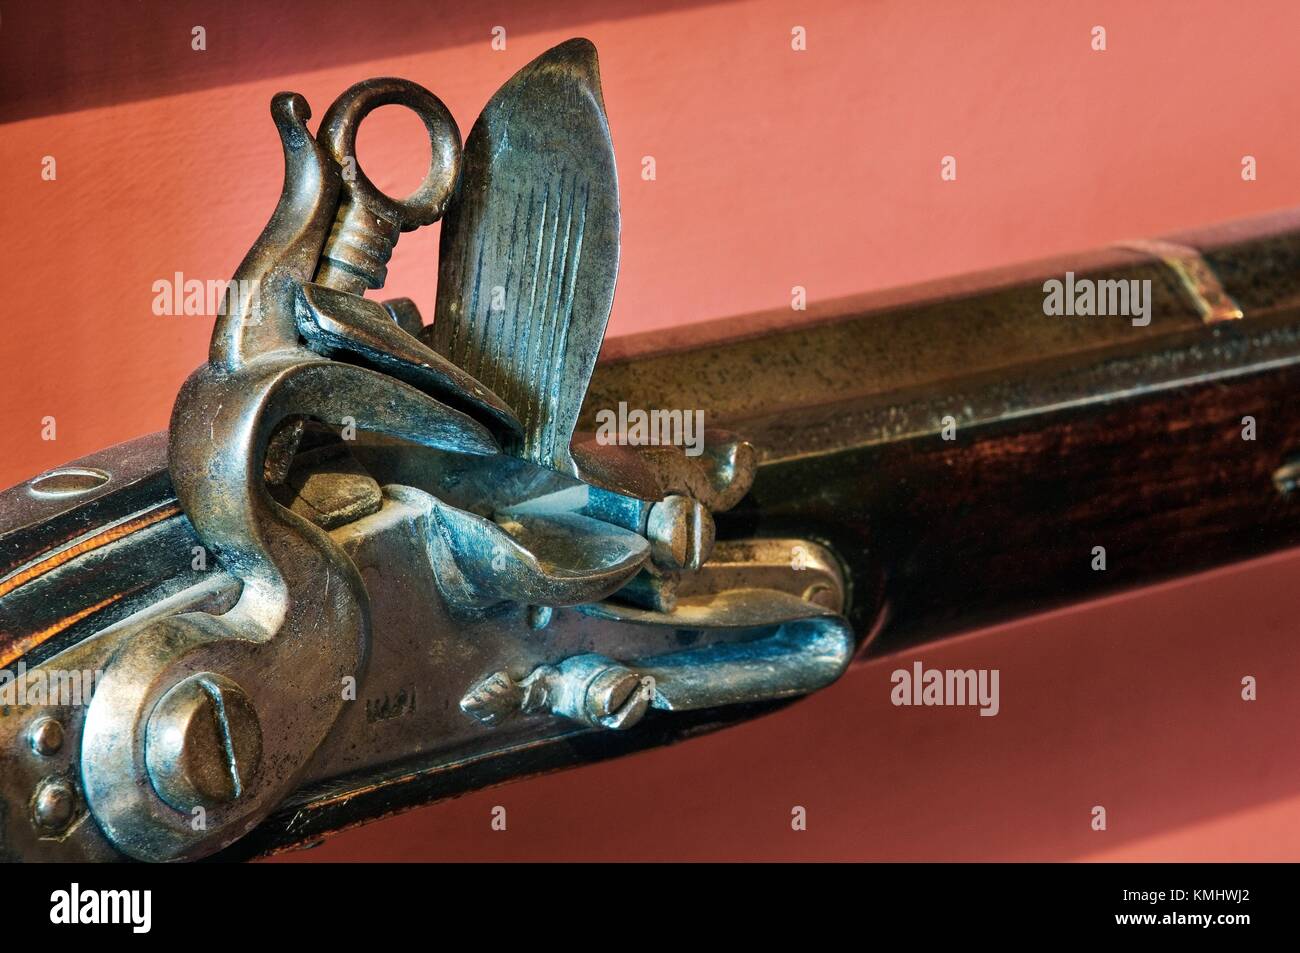 Abbotsford, Sir Walter Scott's home, Borders, Scotland. Rob Roy's flintlock musket, part of Scott's collection in the Armoury Stock Photo